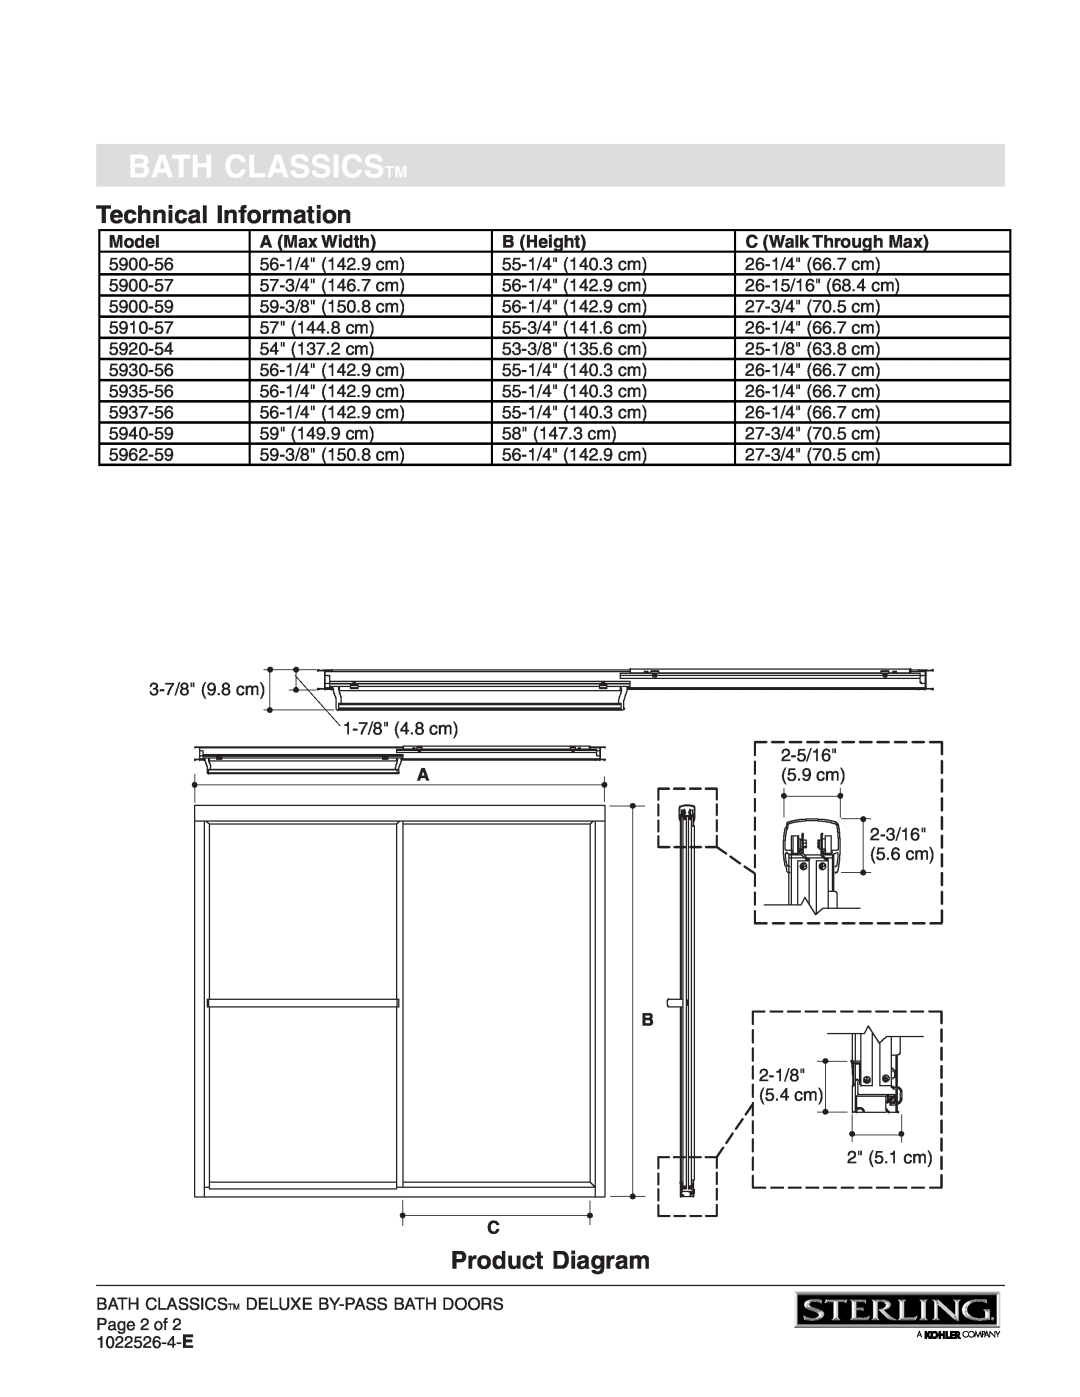 Sterling Plumbing 5962-59*, 5937-56* Technical Information, Product Diagram, Bath Classicstm, Model, A Max Width, B Height 